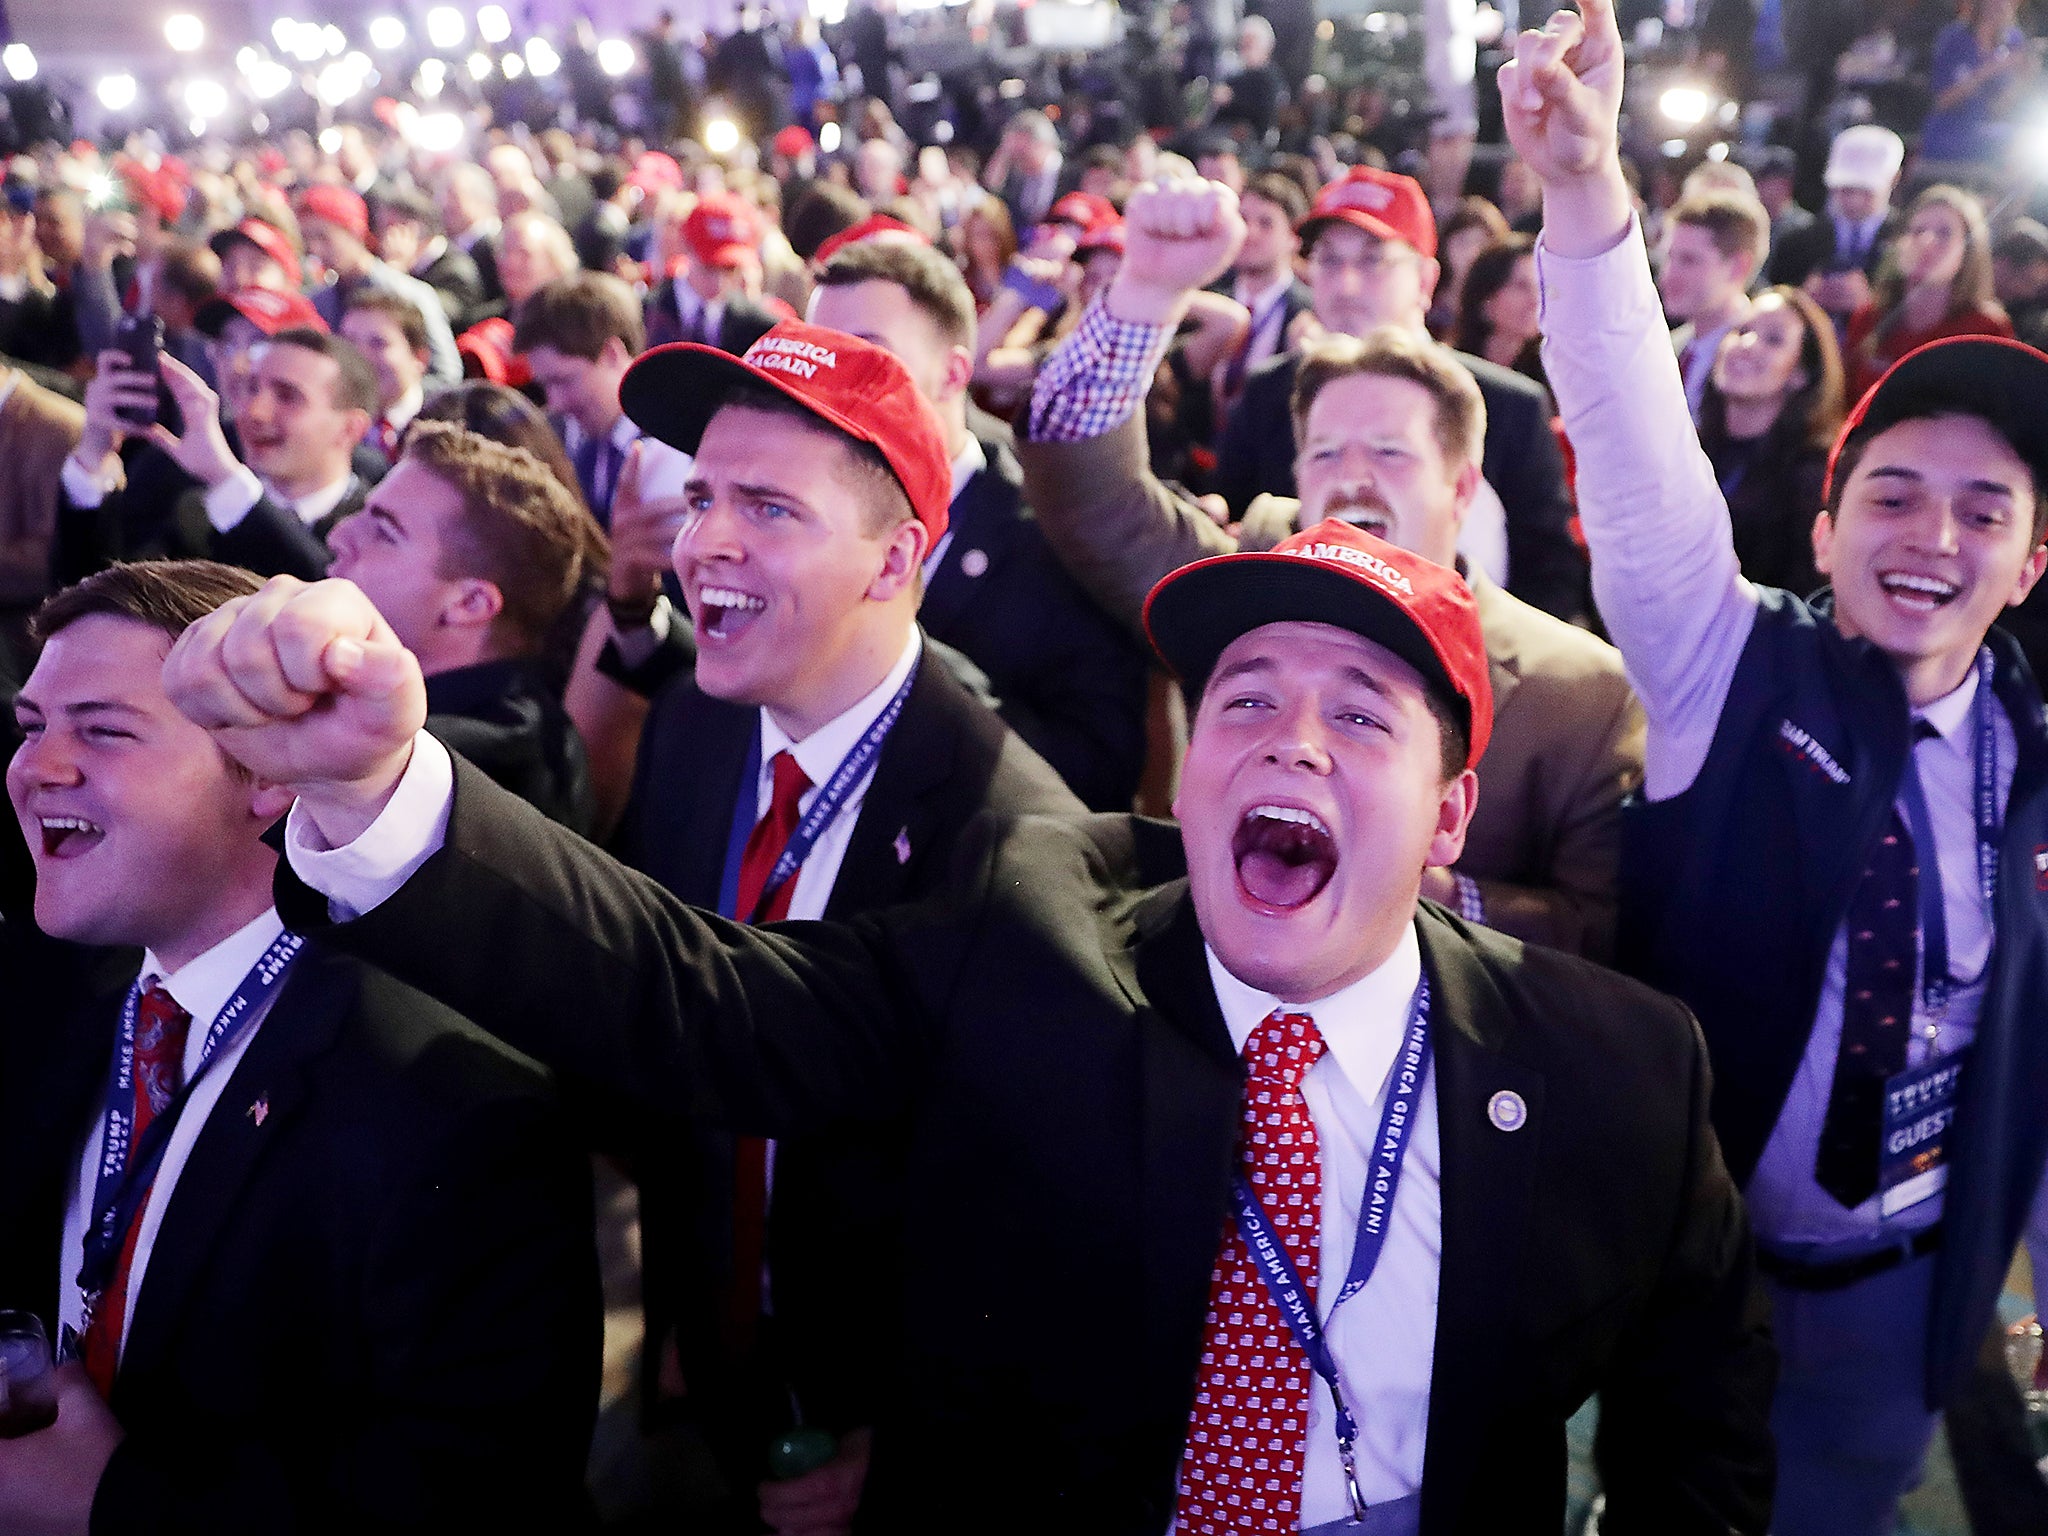 Joy among Trump supporters, but the markets weren’t cheering so loudly early on